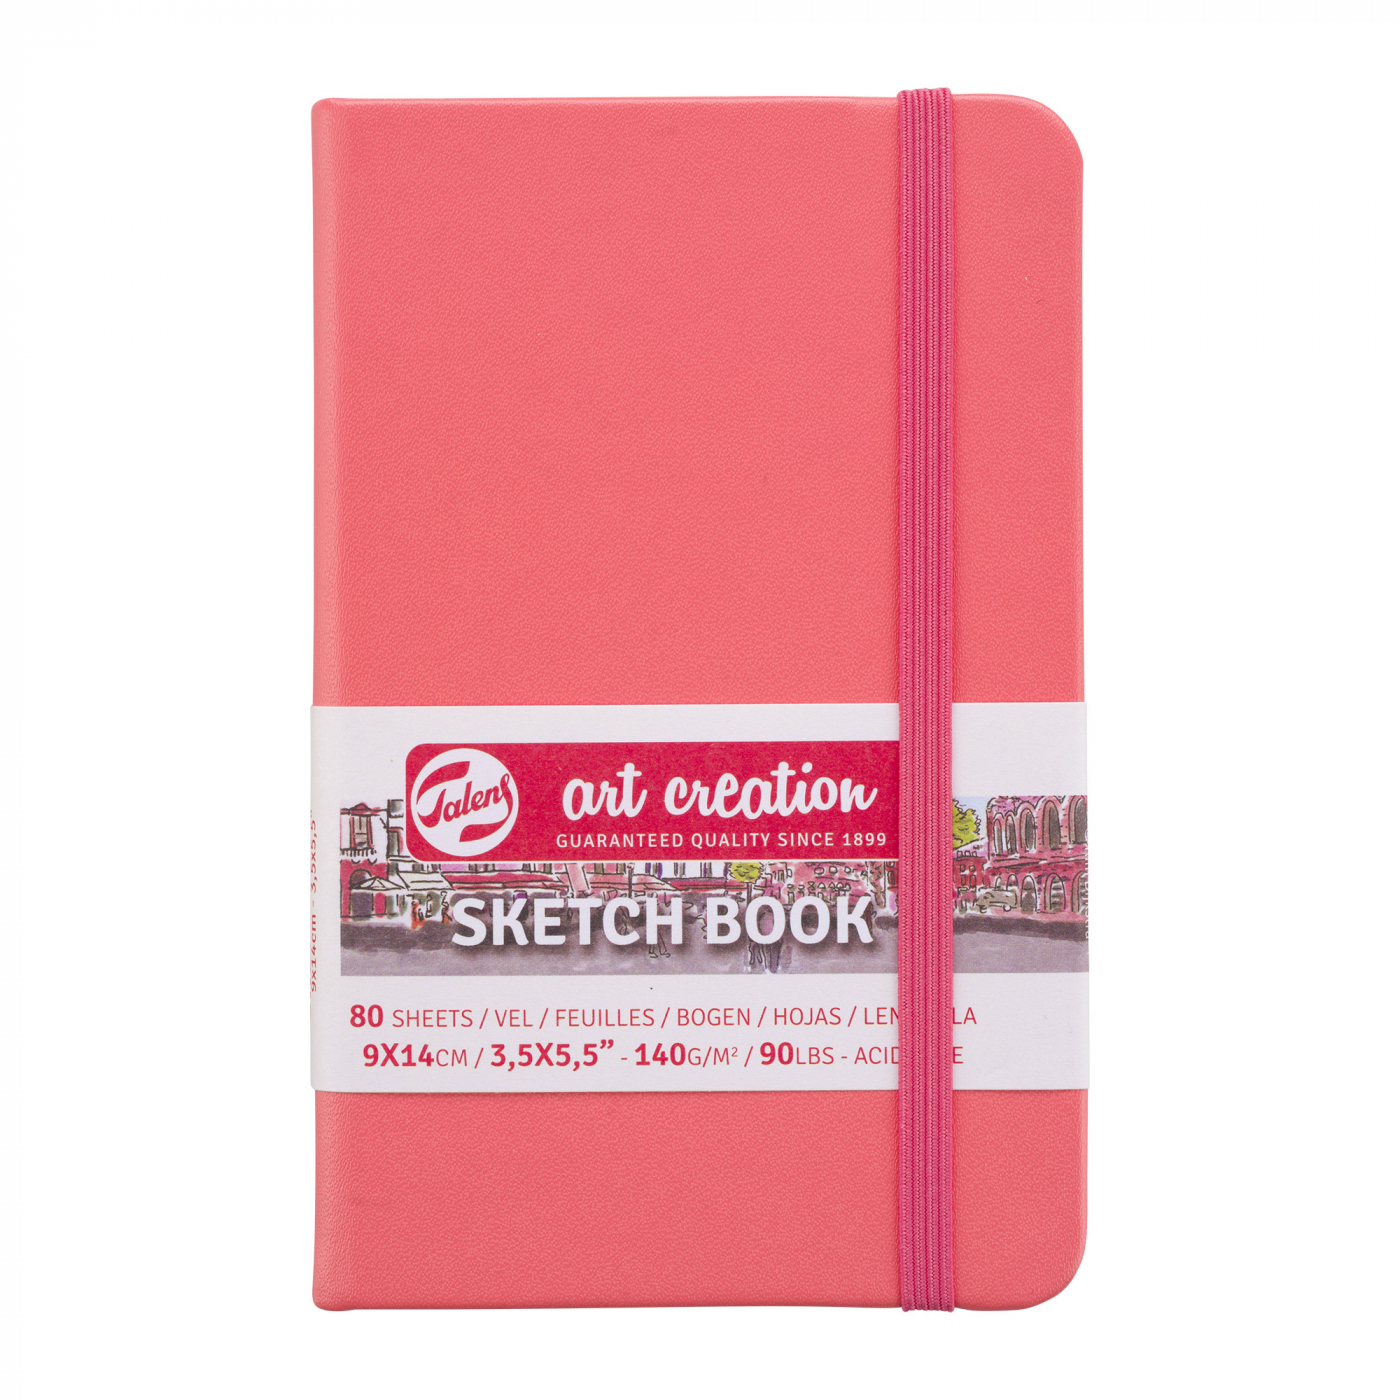 Sketch Book - A4 Size - 250g Paper - For Acrylic & Watercolor